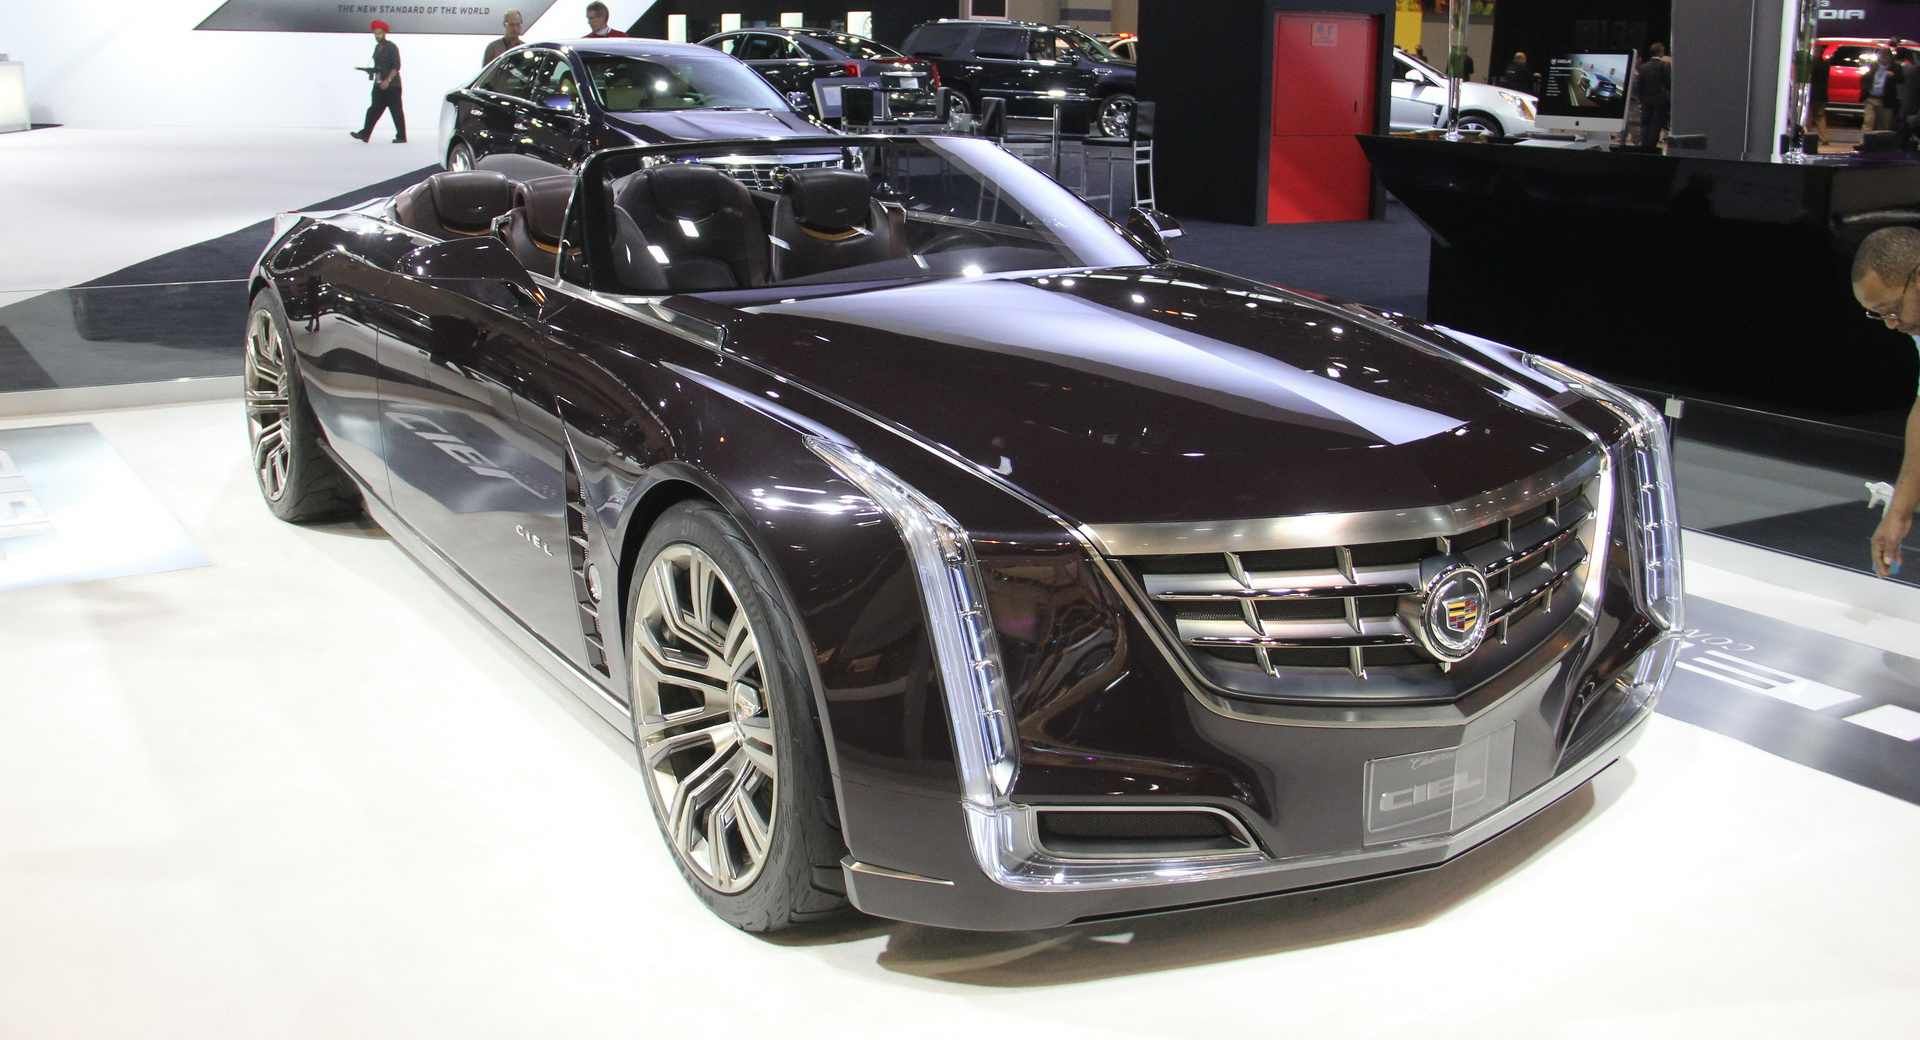 Perhaps Cadillac Should Have Built Those Stunning Concepts After All